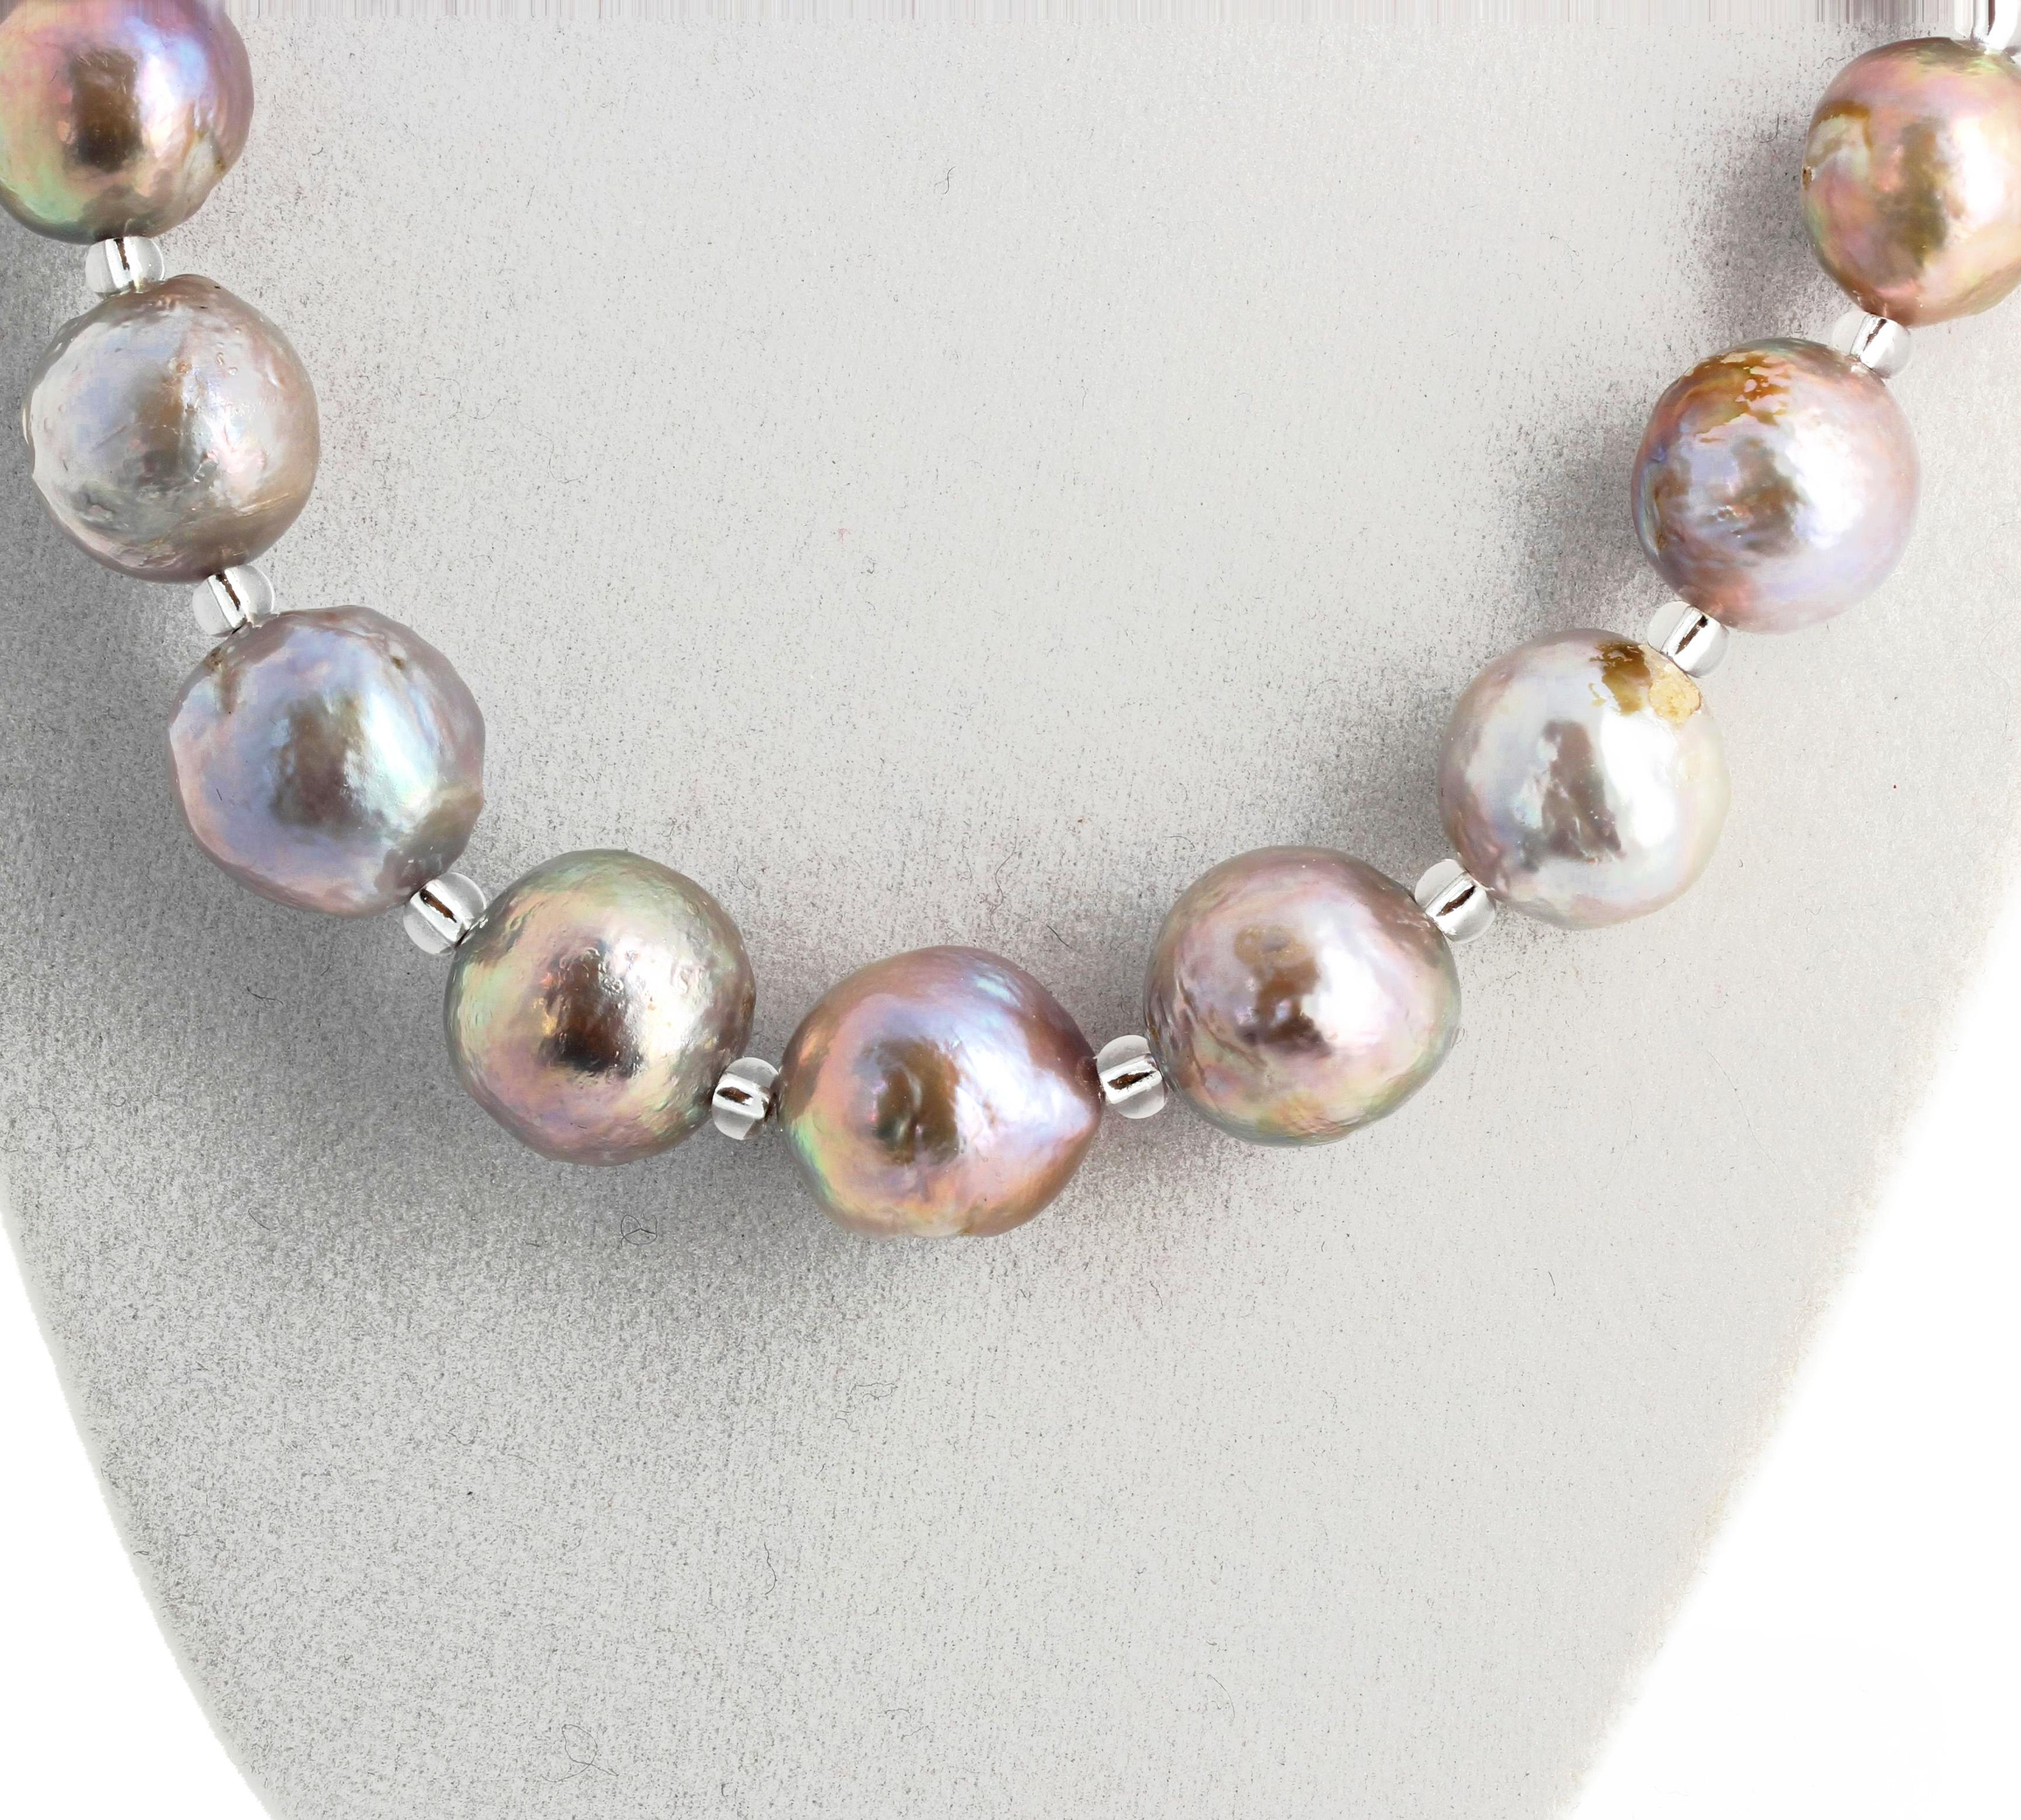 Glowing goldy and silvery and lilac natural cultured Pearls set with brilliant silver sparkling crystals - they make the Pearls even more shiny - in a 17 inch long necklace with a silver clasp.  The little 